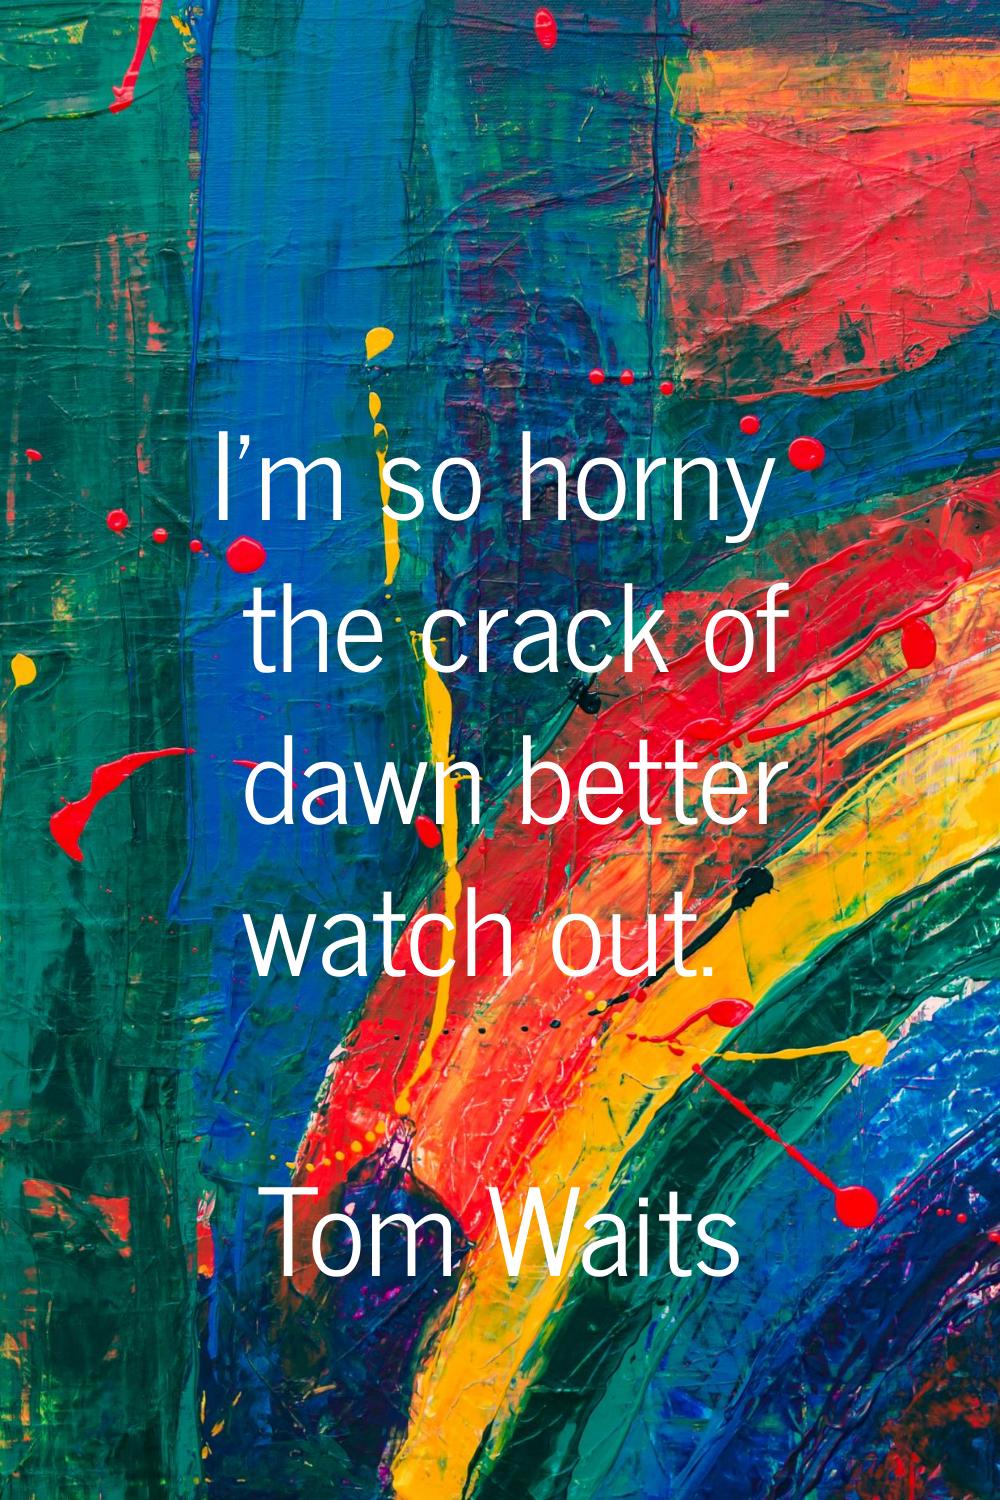 I'm so horny the crack of dawn better watch out.